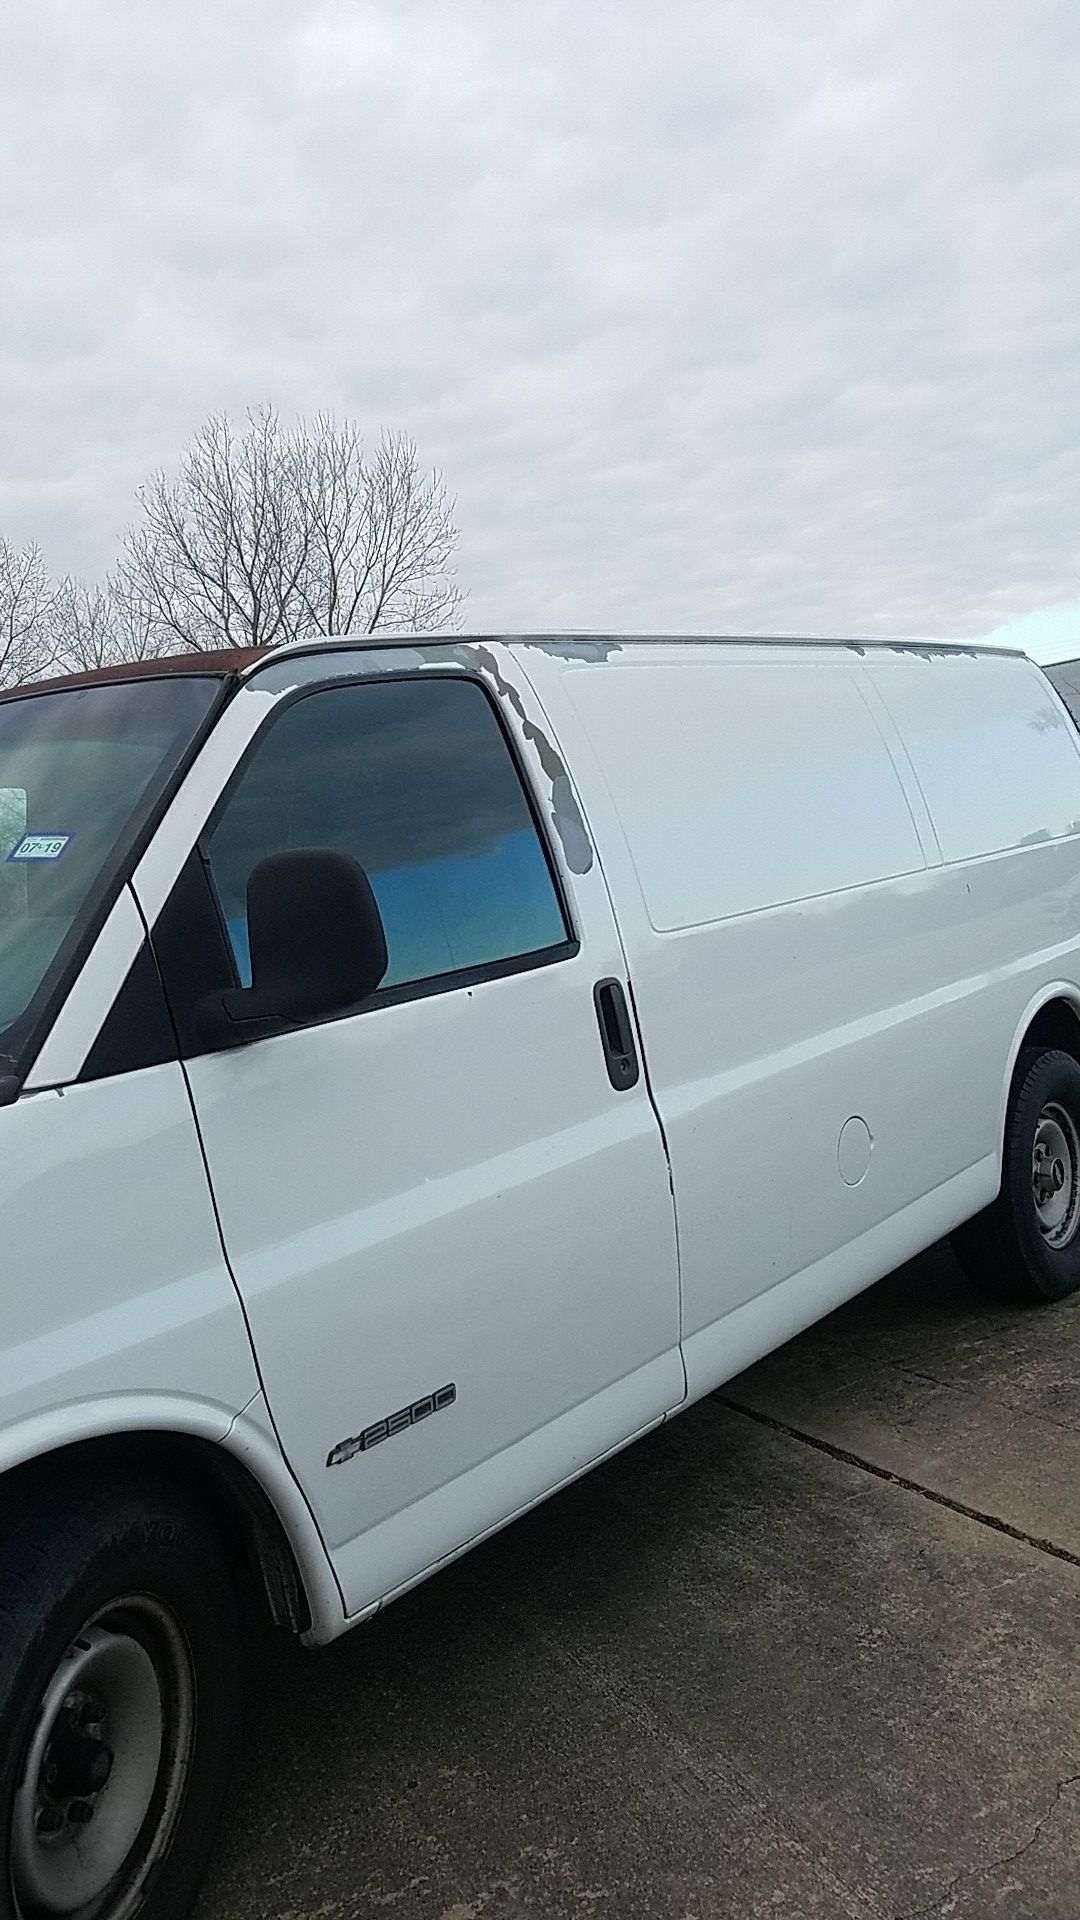 CHEVY EXPRESS CARGO VAN. 2002. RUNS SPEEDLY WELL. 5.7. I AM NOT SELLING WITH THE TOOLS IMSIDE, ONLY THE VAN.